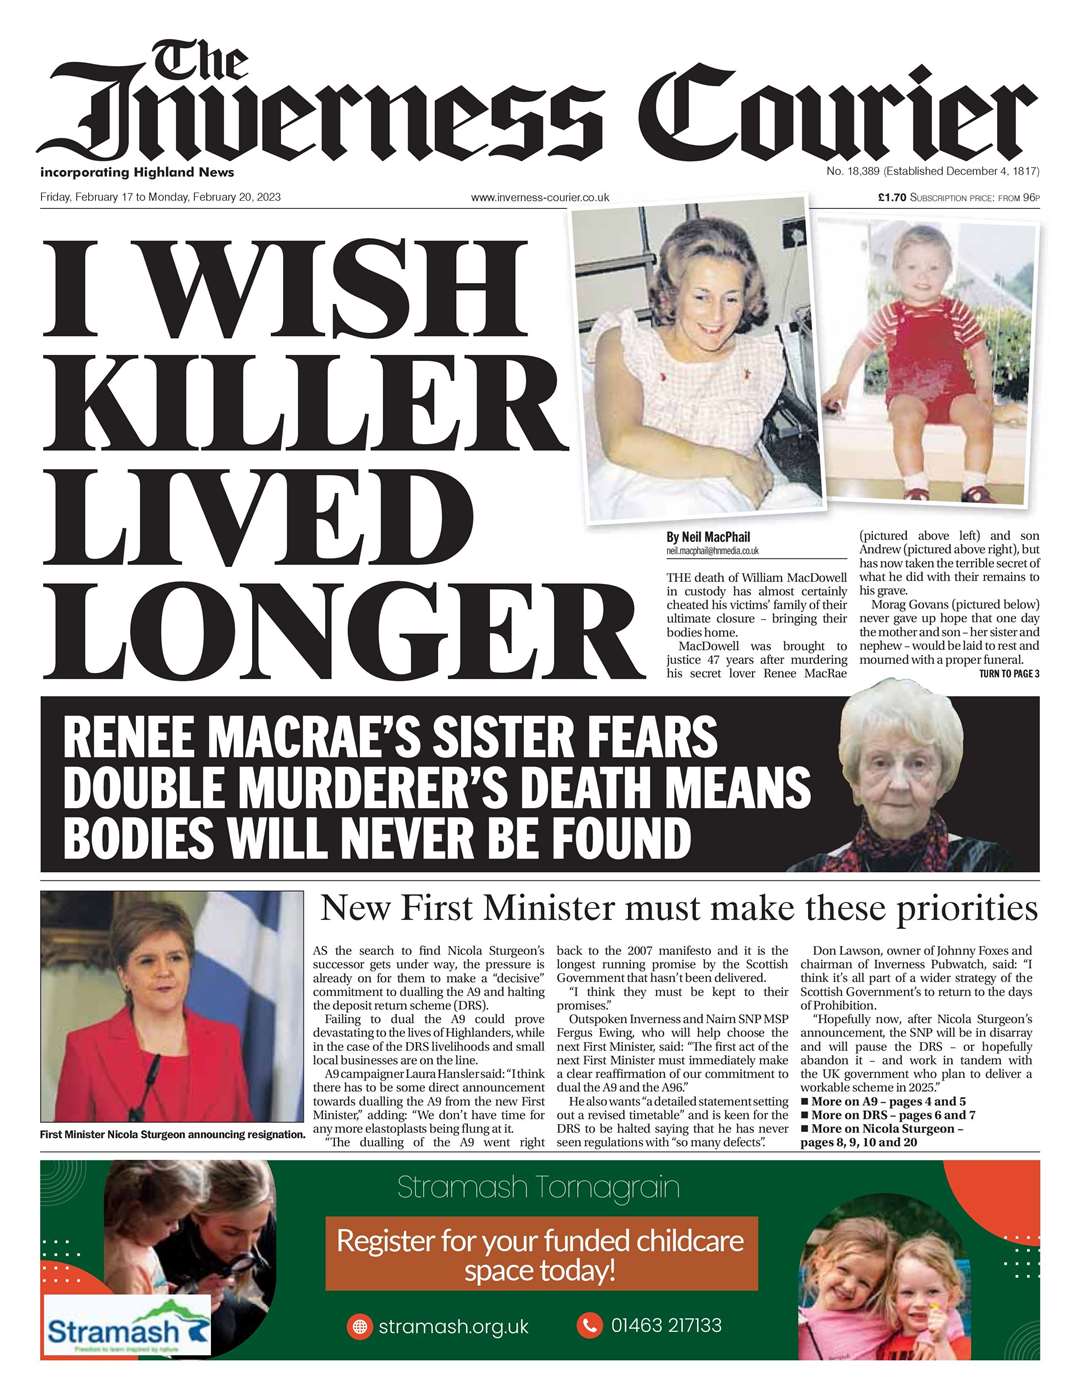 The Inverness Courier, February 17, front page.